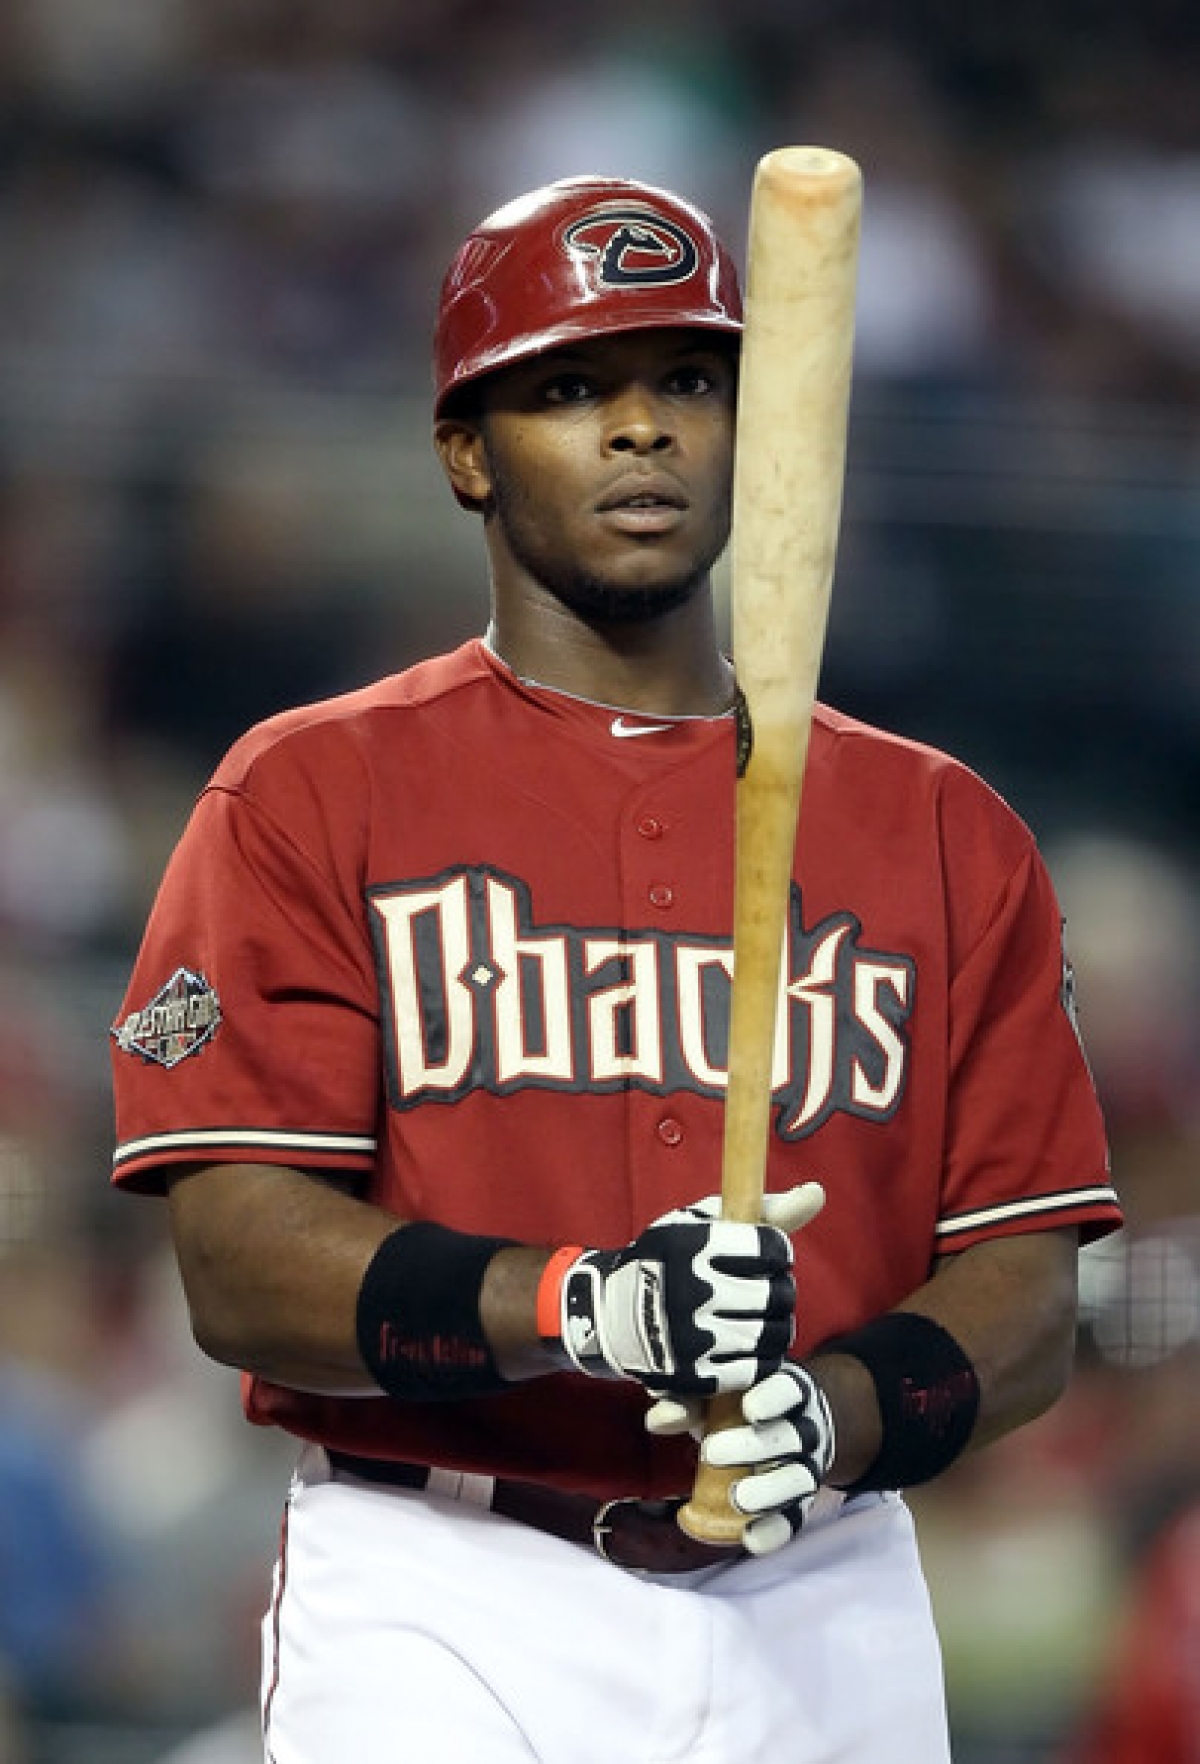 Not in Hall of Fame - 11. Justin Upton